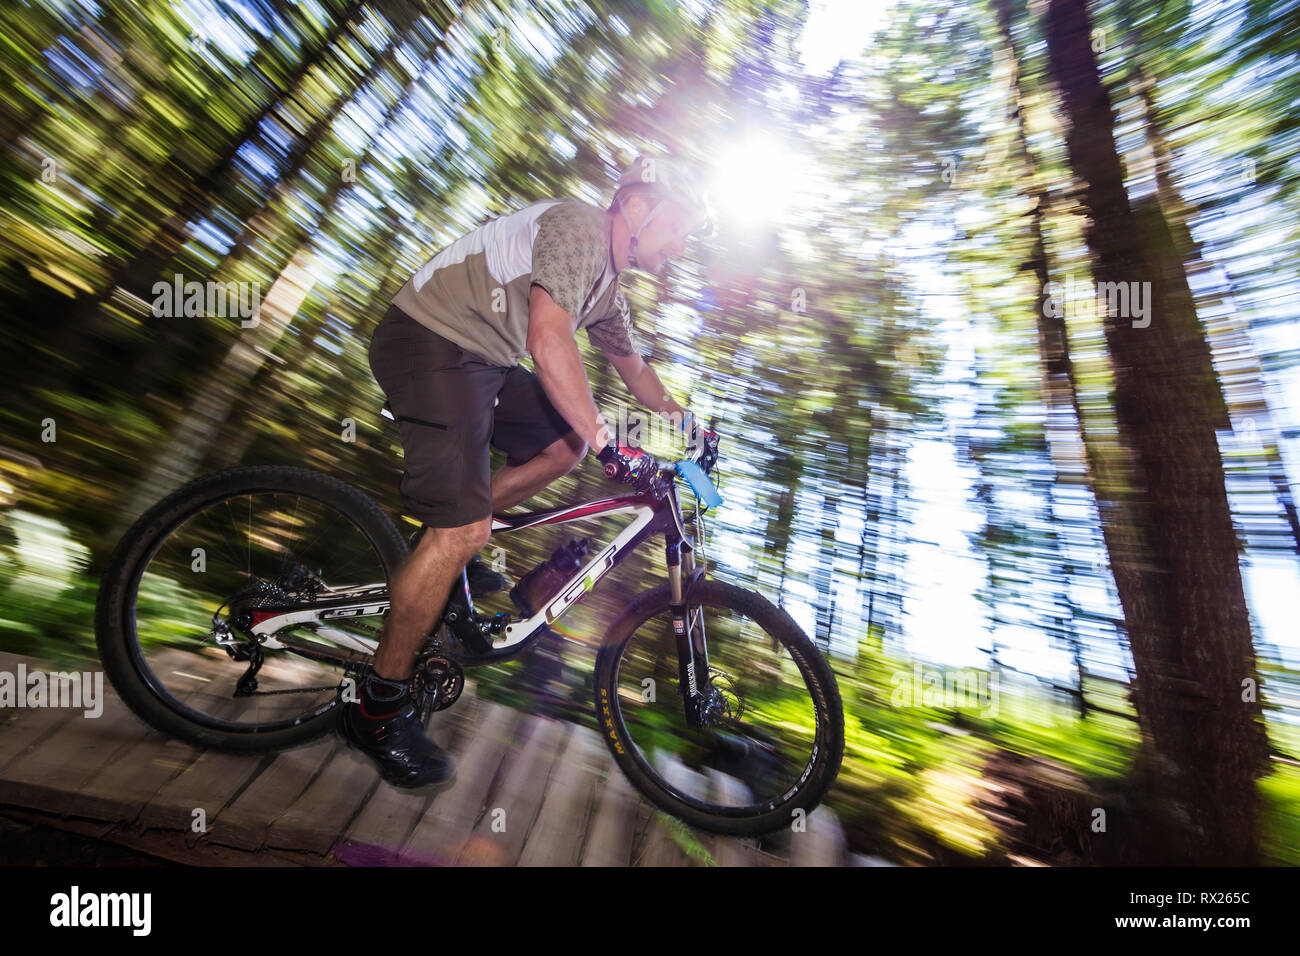 A mountain biker negotiates a bridge section on 'Kitty Litter' a fun mountain bike trail in the Cumberland forest.  Cumberland,  The Comox Valley, Vancouver Island, British Columbia, Canada.  NO MODEL RELEASE Stock Photo